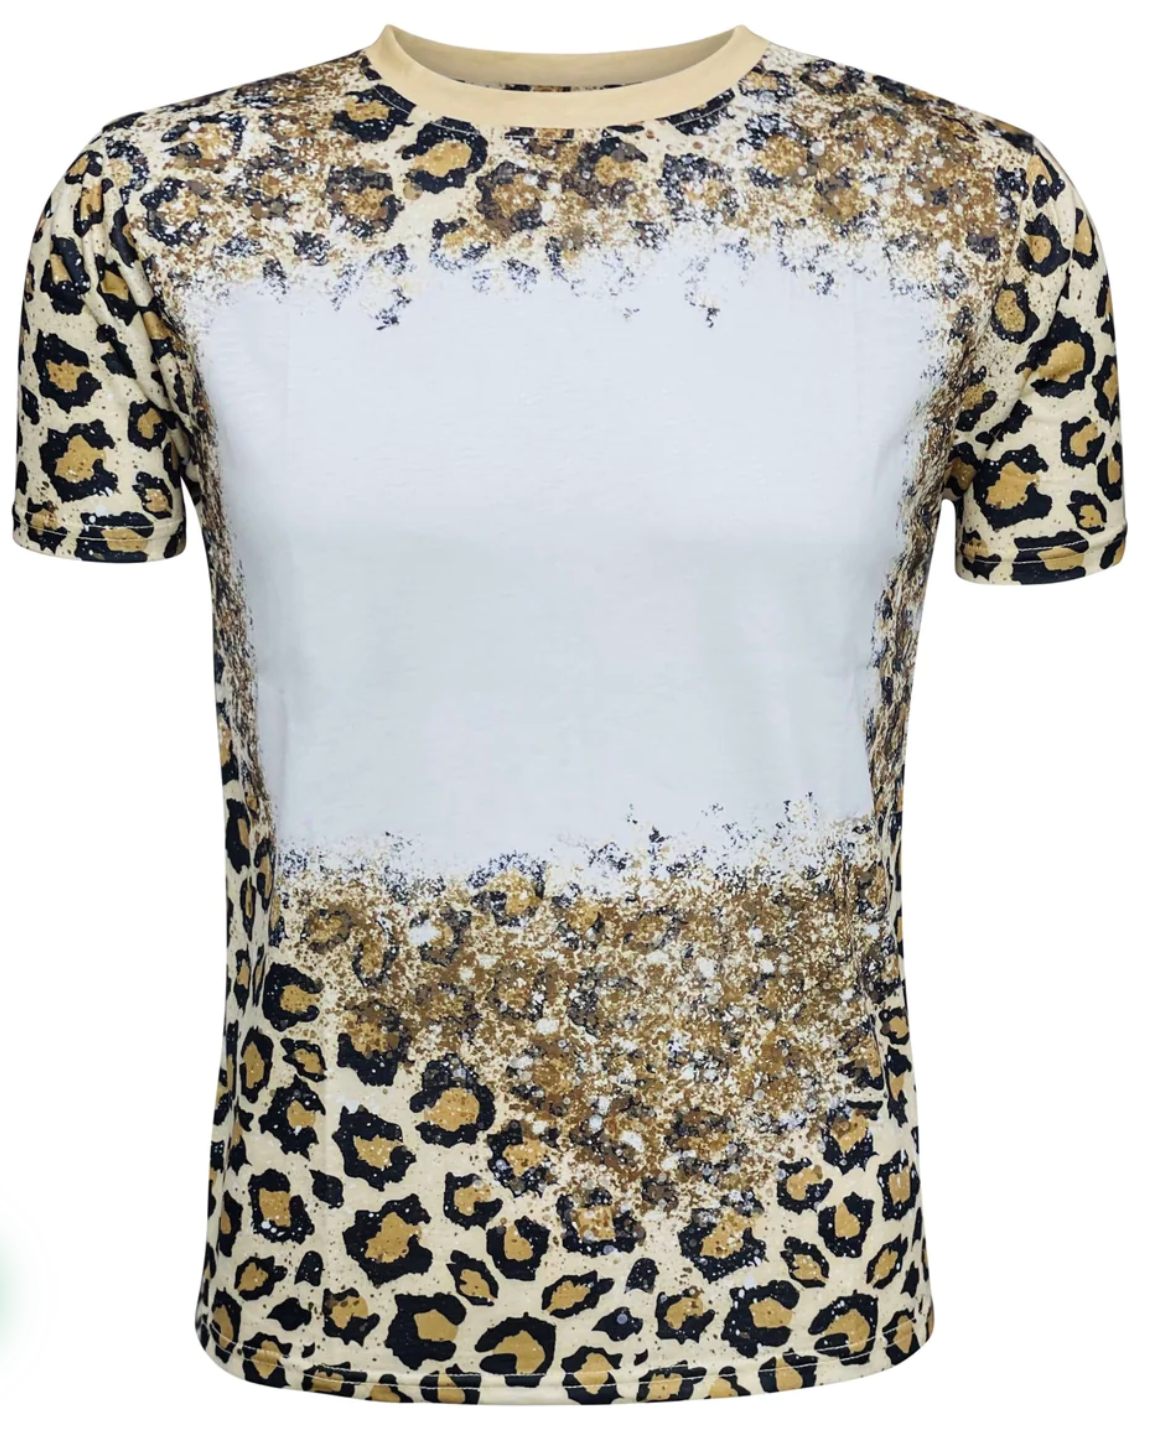 Adult Leopard/ Cheetah Faux Bleached Shirts, ready for Sublimation, Style #1